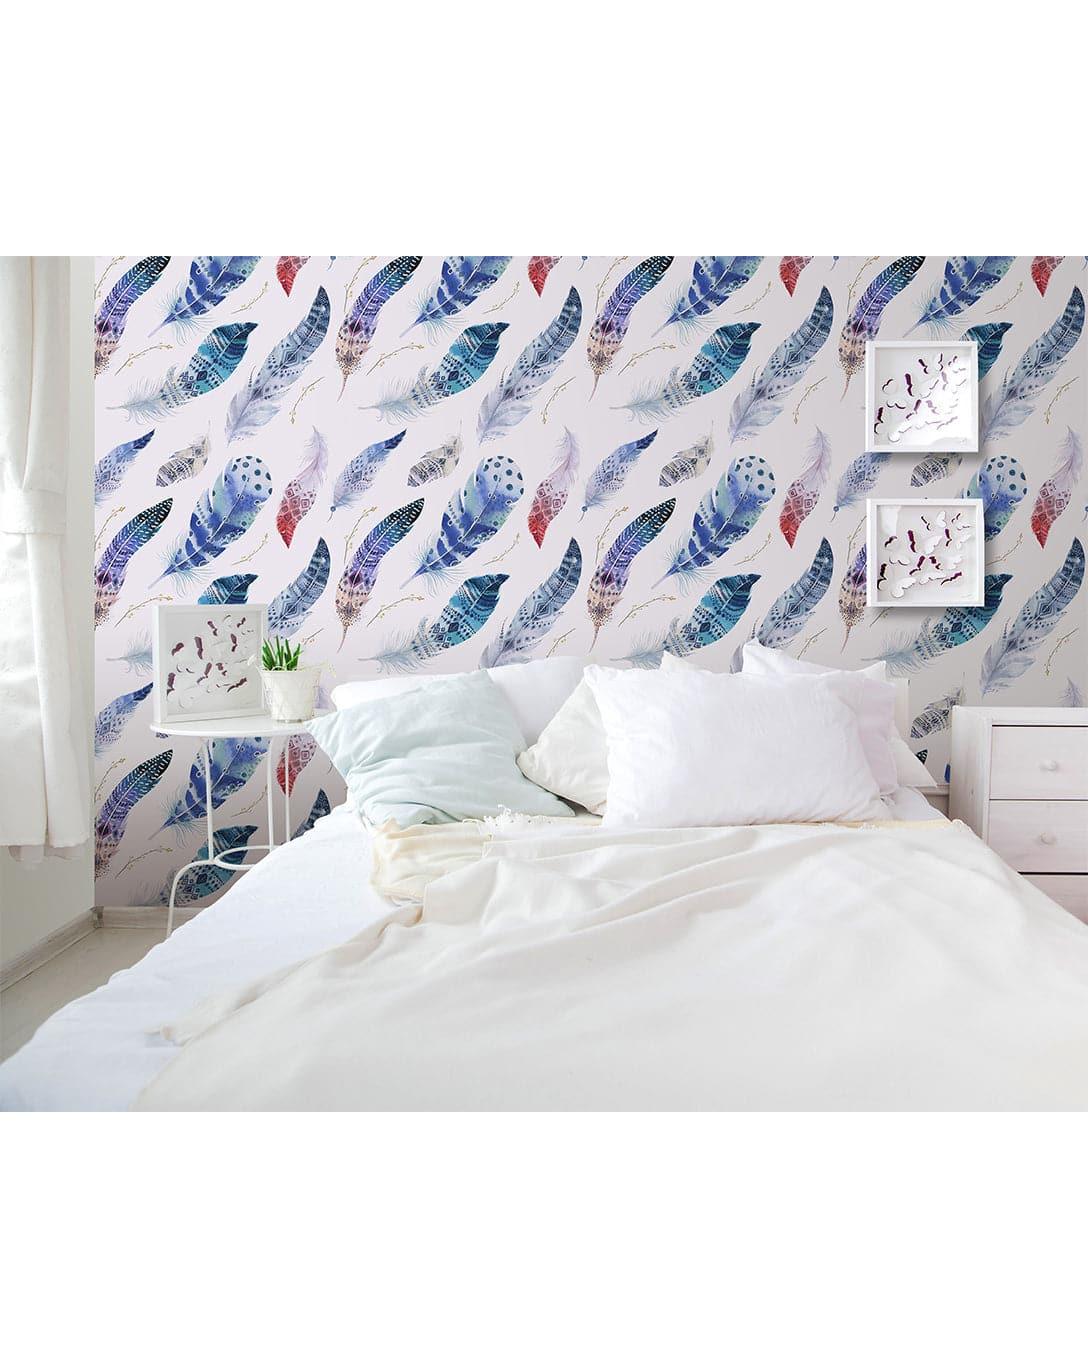 Watercolor Indian Feathers Removable Wallpaper Watercolor Indian Feathers Removable Wallpaper 